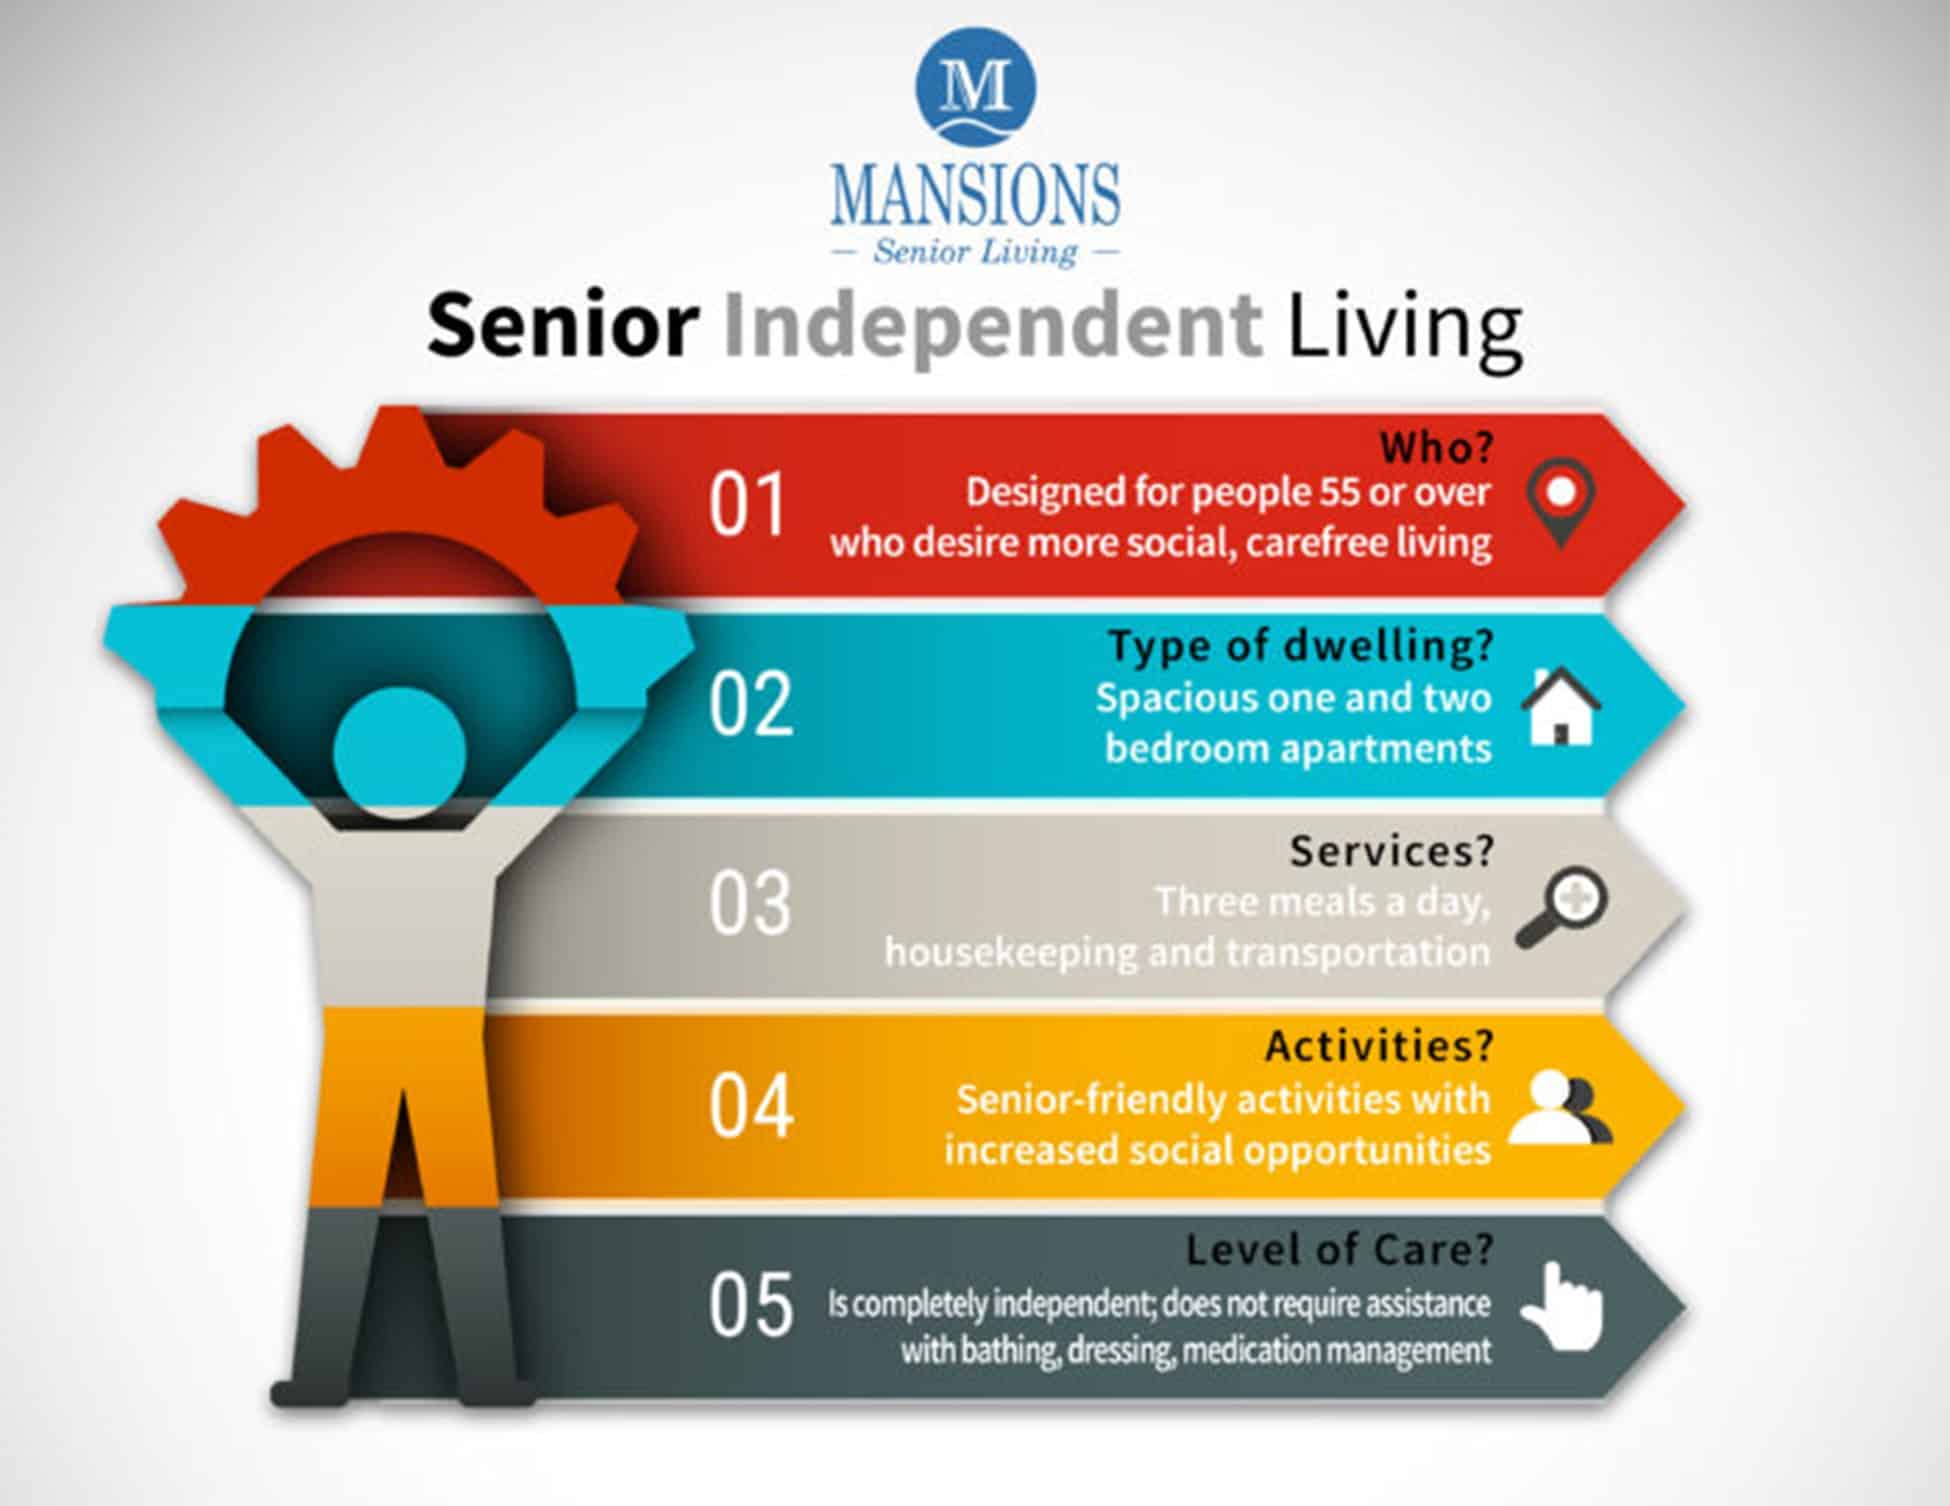 When is the Right Time to Move Into an Independent Living Community?